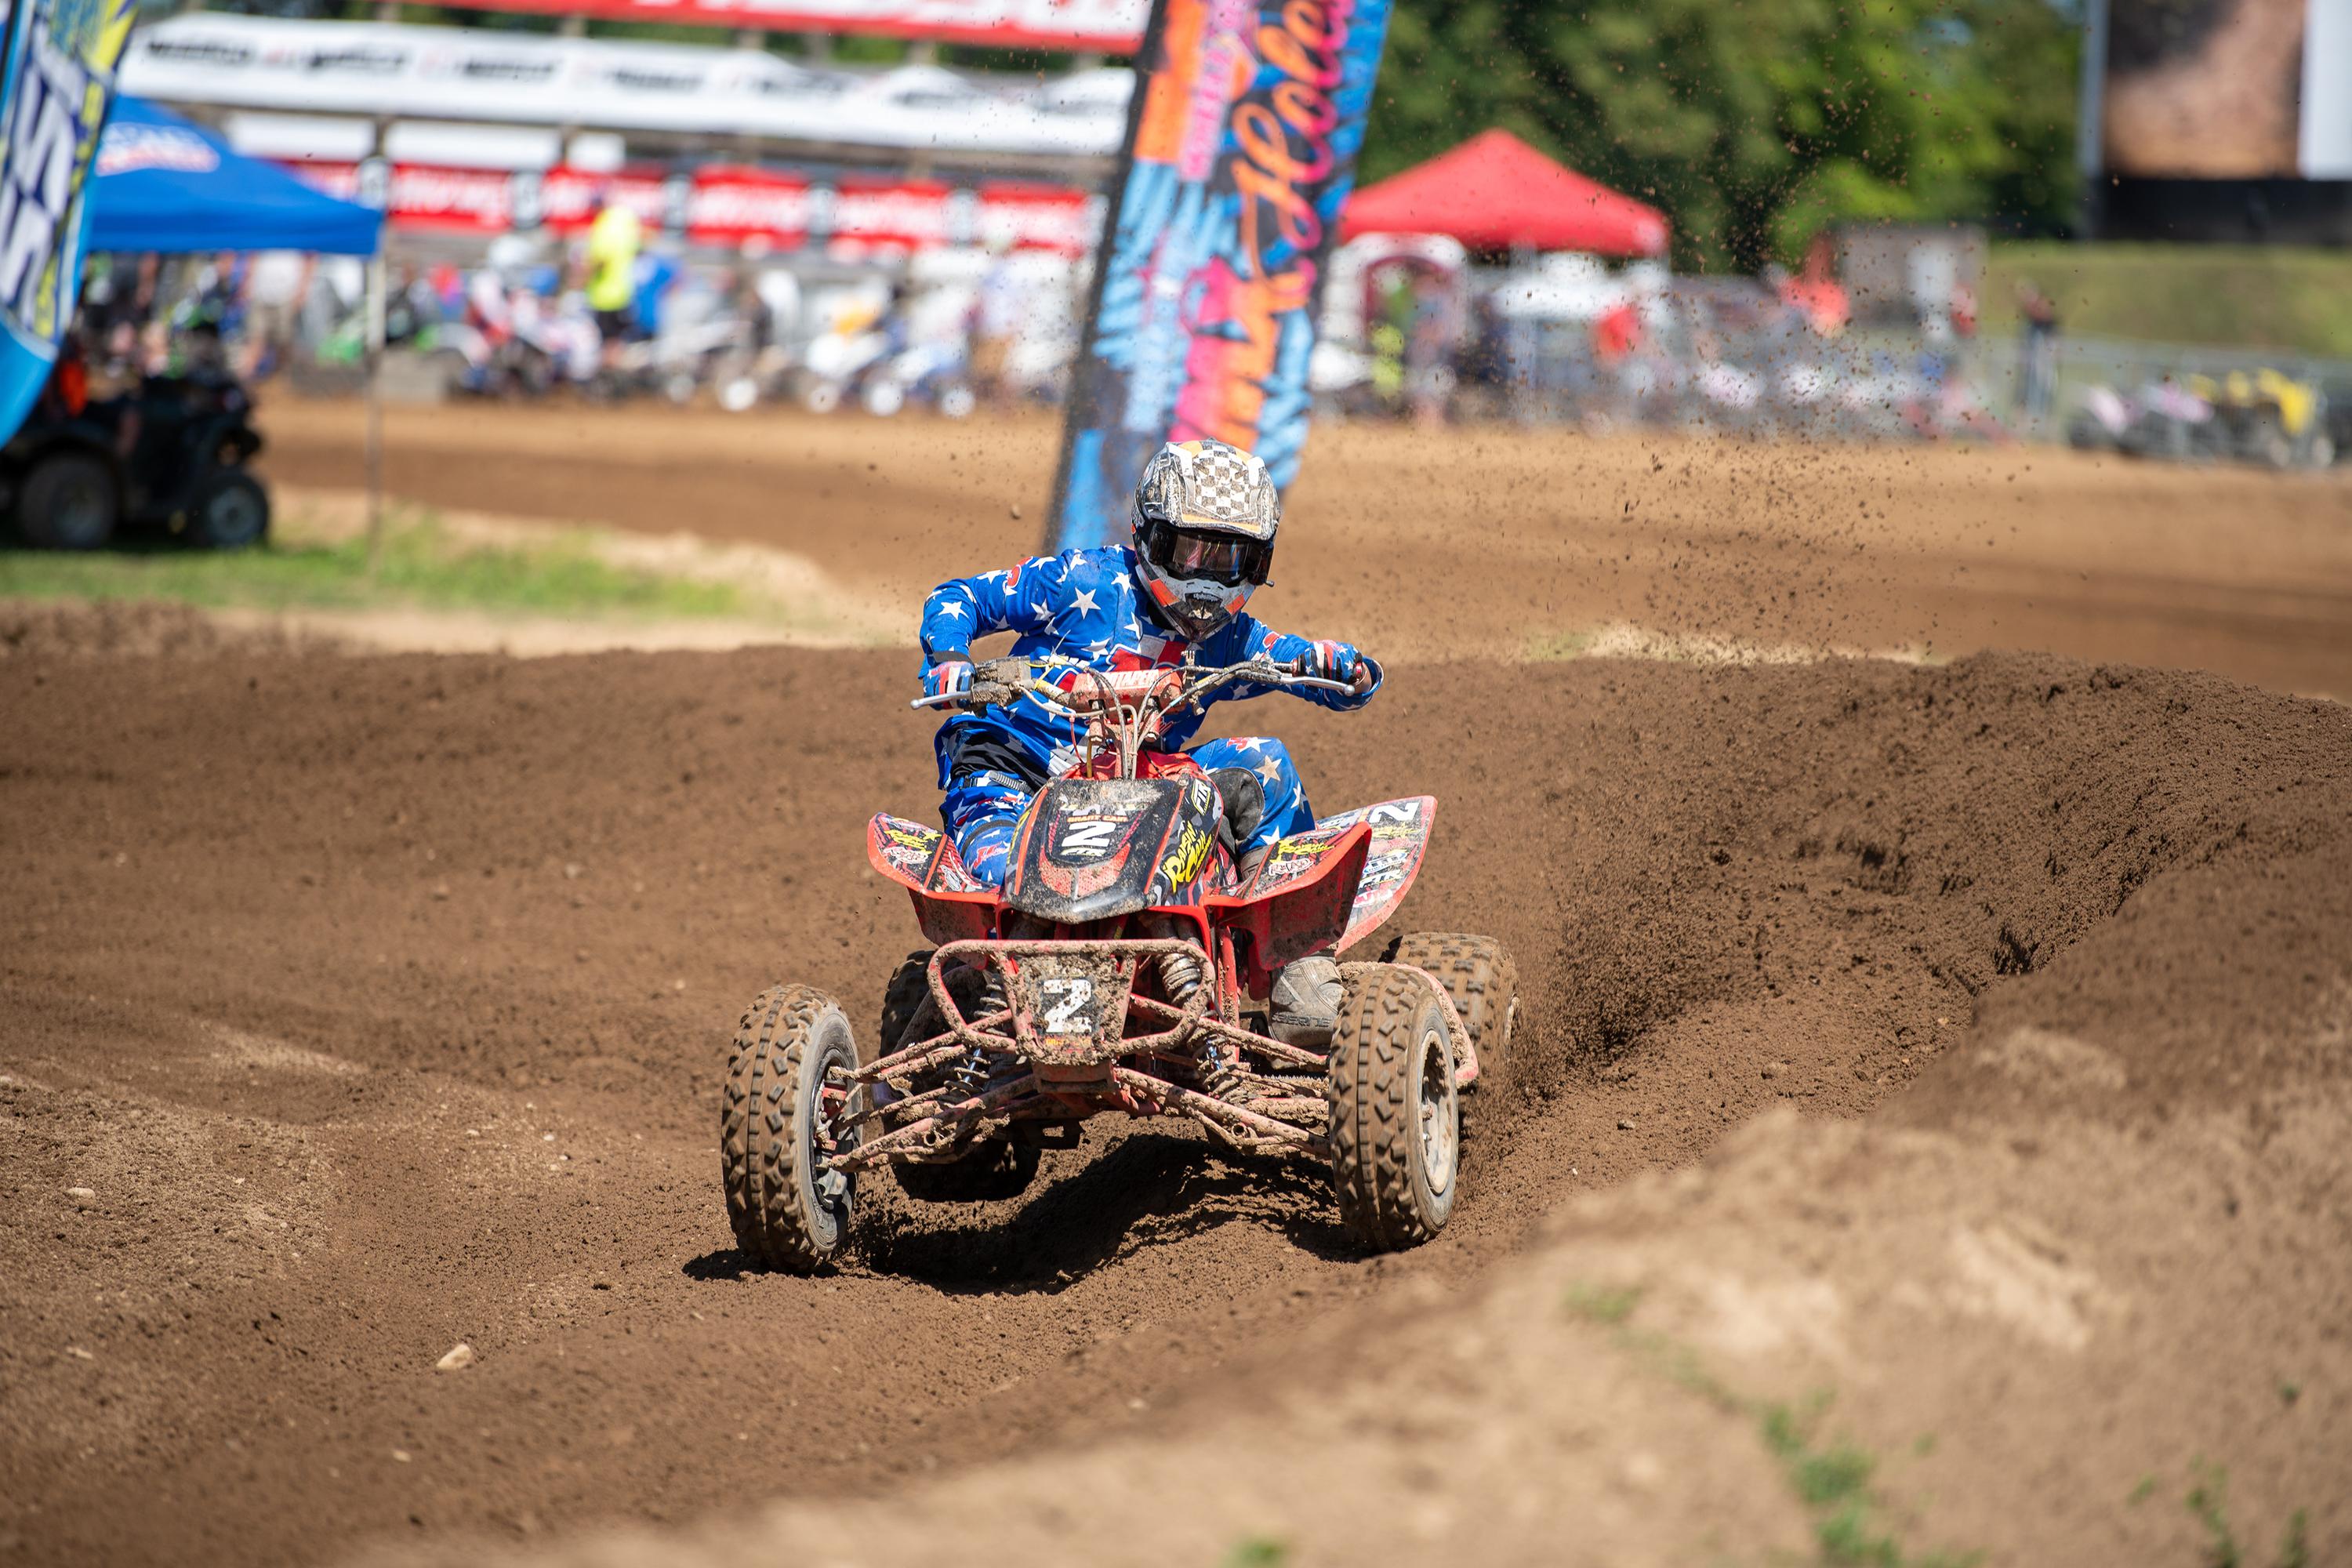 Competition Bulletin 2023-1: Tentative 2023 ATVMX Supplemental Rules, National Classes, Race Order and Practice Order Available for Public Comment